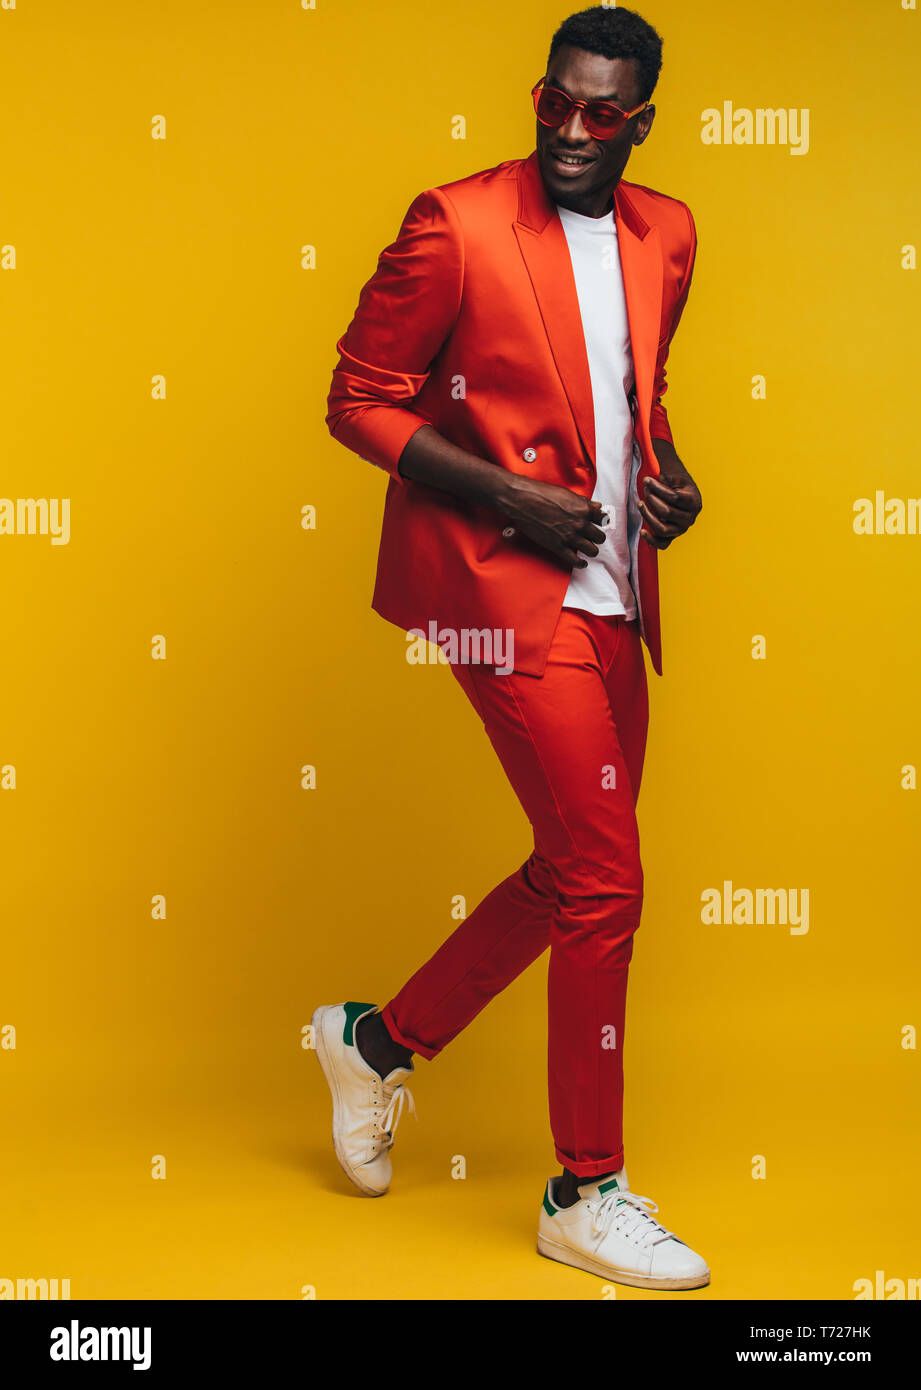 Full length of stylish young african man in orange outfit over yellow background. Fashion model in smart casuals. Stock Photo